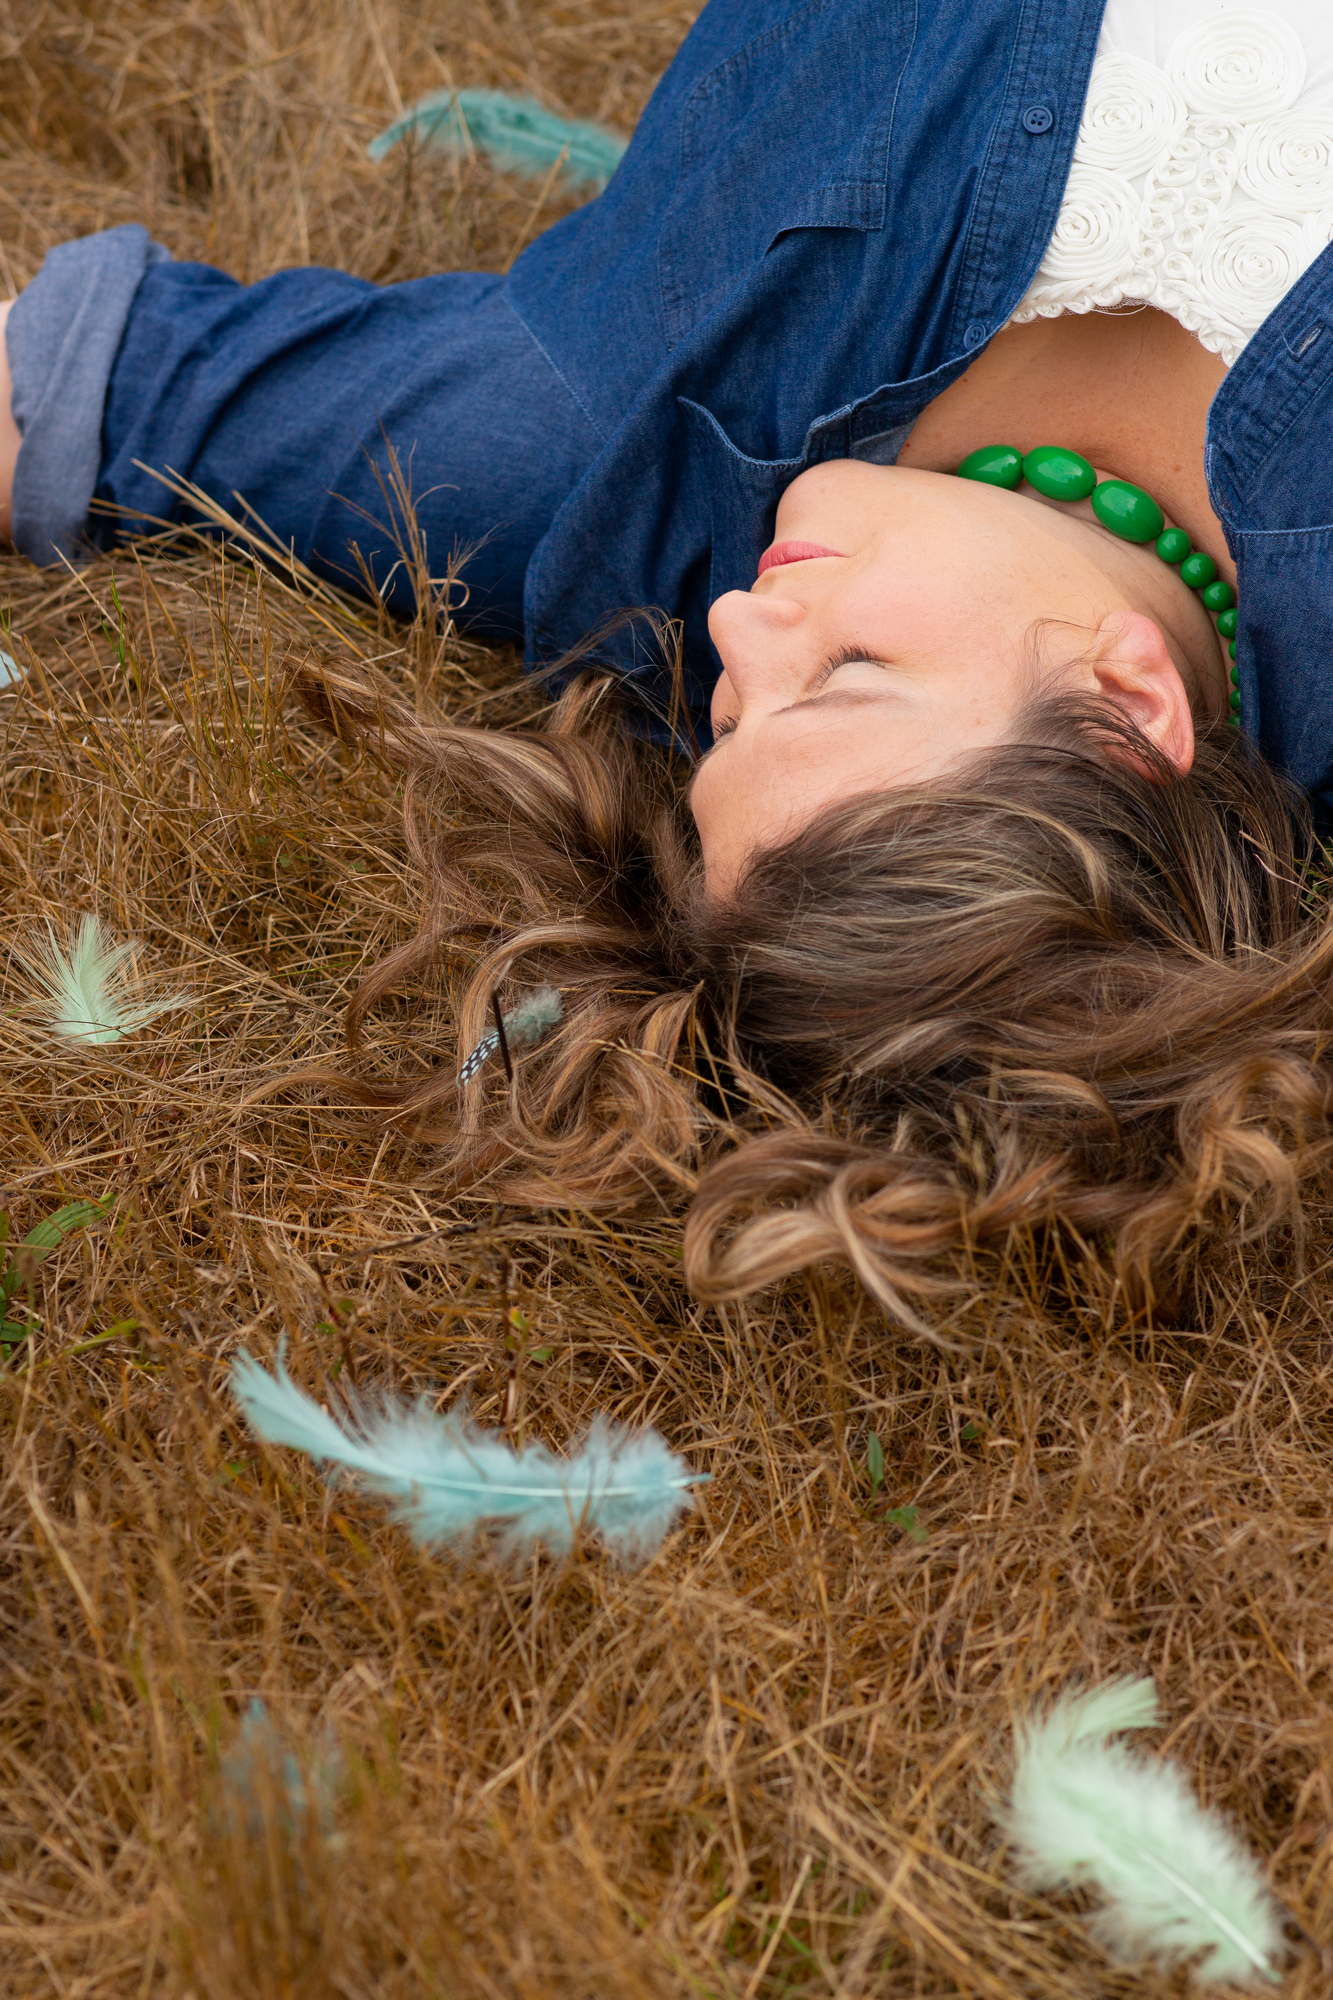 A woman wearing a green necklace lays on the grass for an outdoor portrait photo shoot